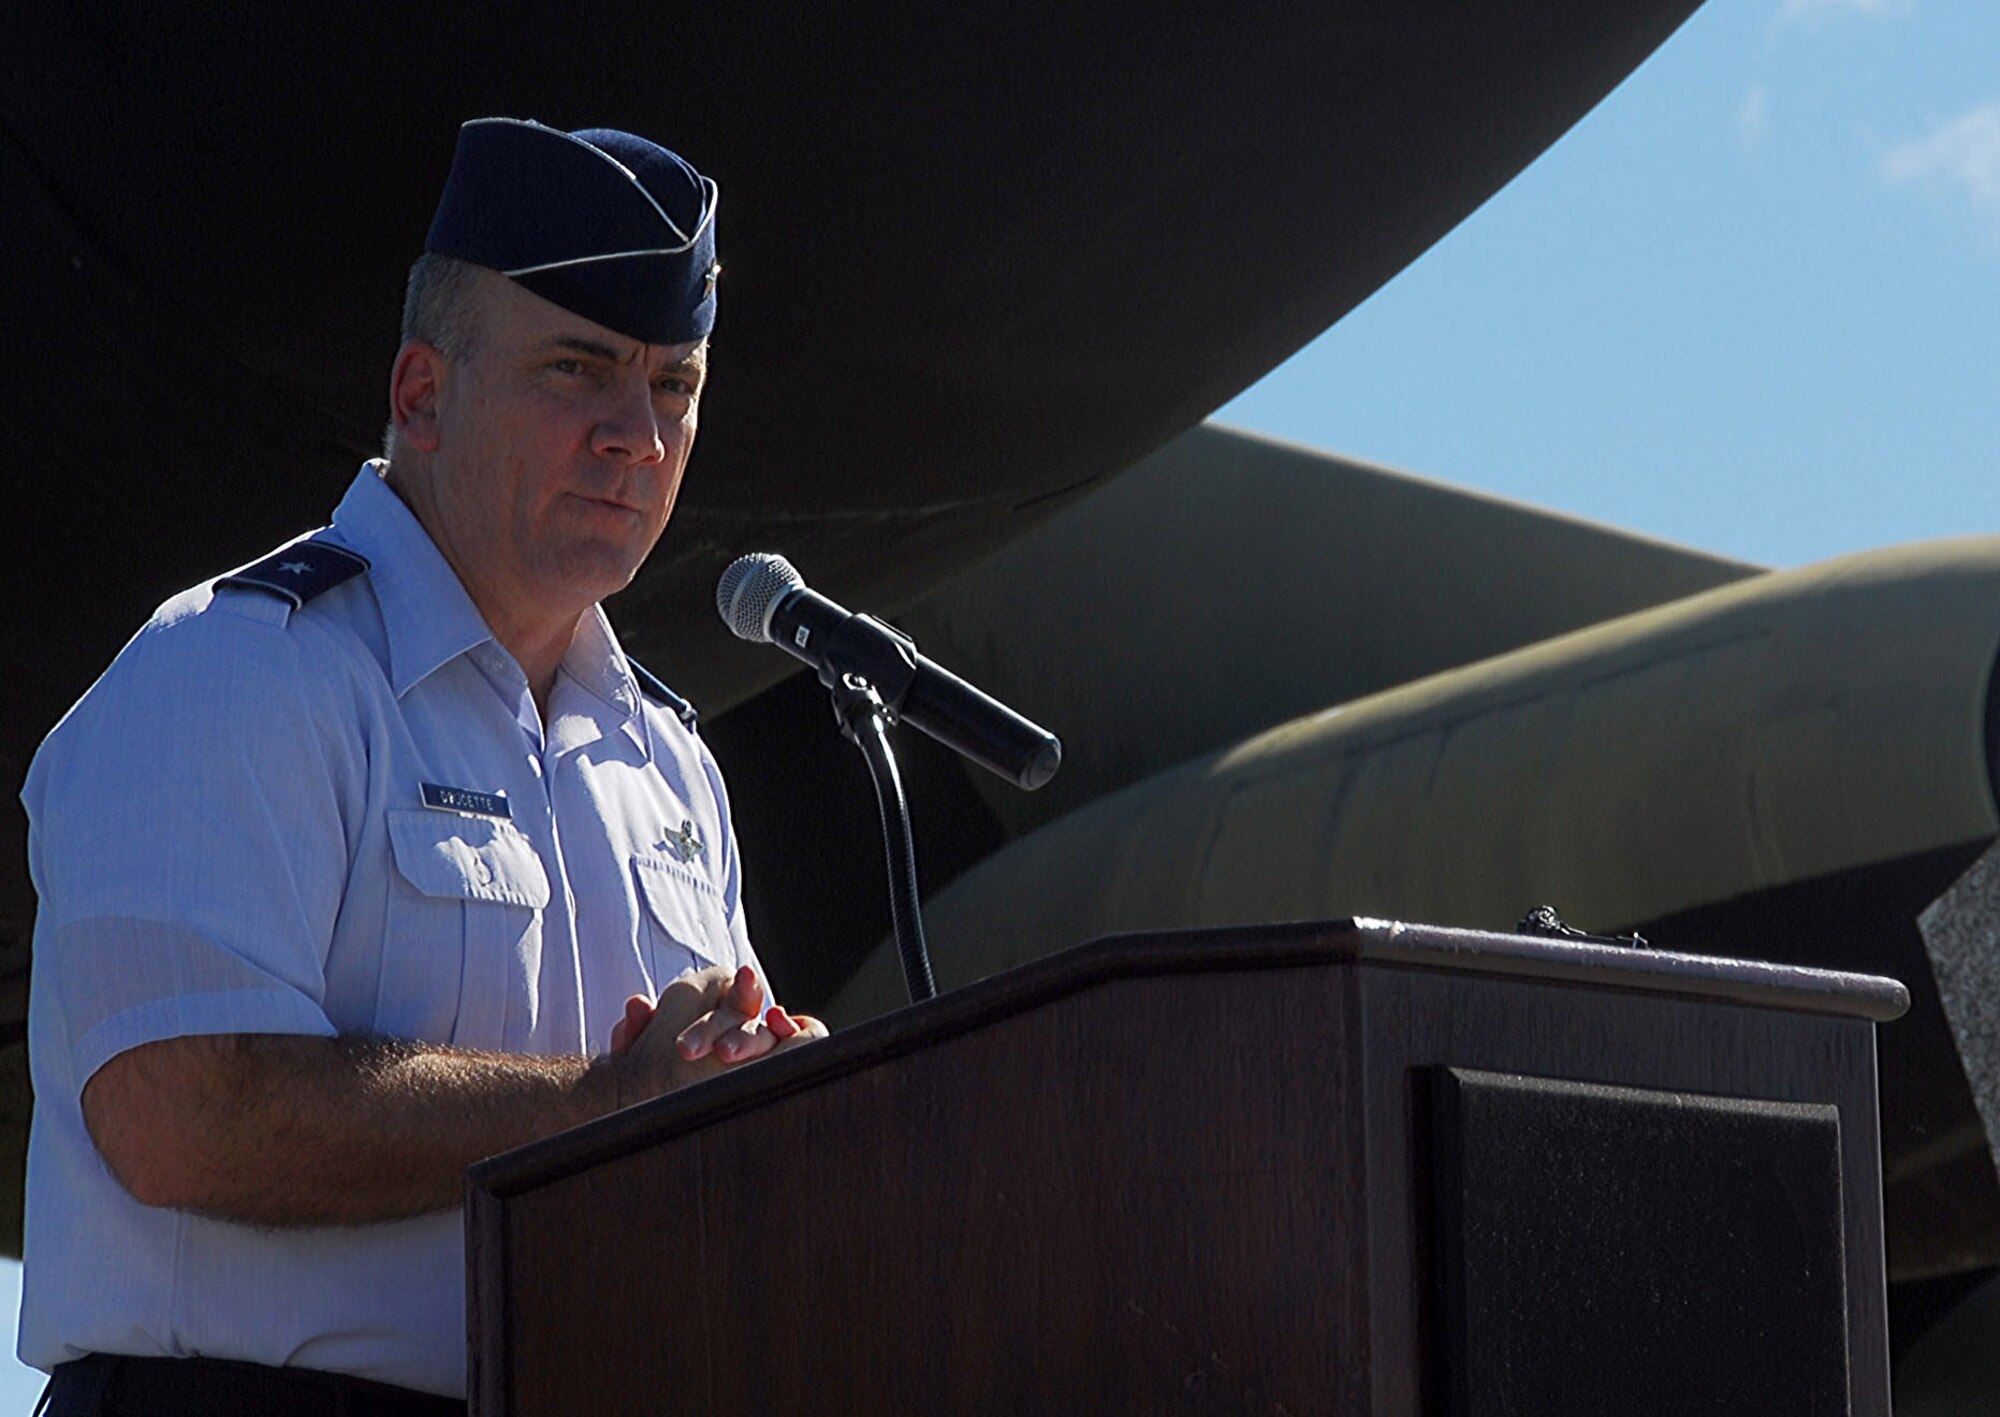 Brig. Gen. John Doucette, 36th Wing commander, speaks during an Operation Linebacker II memorial ceremony at Arc Light Memorial Park, Dec. 17, at Andersen Air Force Base, Guam. Operation Linebacker II went underway when, on Dec. 18, 1972, 87 B-52s were launched from Andersen in one hour and 43 minutes. Throughout the 11-day operation, Andersen-based B-52s flew 379 of the 729 sorties. Often called the "11-day war," Linebacker II led to the renewal of the Paris Peace Talks and, on January 28, 1973, the signing of a cease-fire agreement with the government of North Vietnam.  (U.S. Air Force photo/Staff Sgt. Jamie Powell)